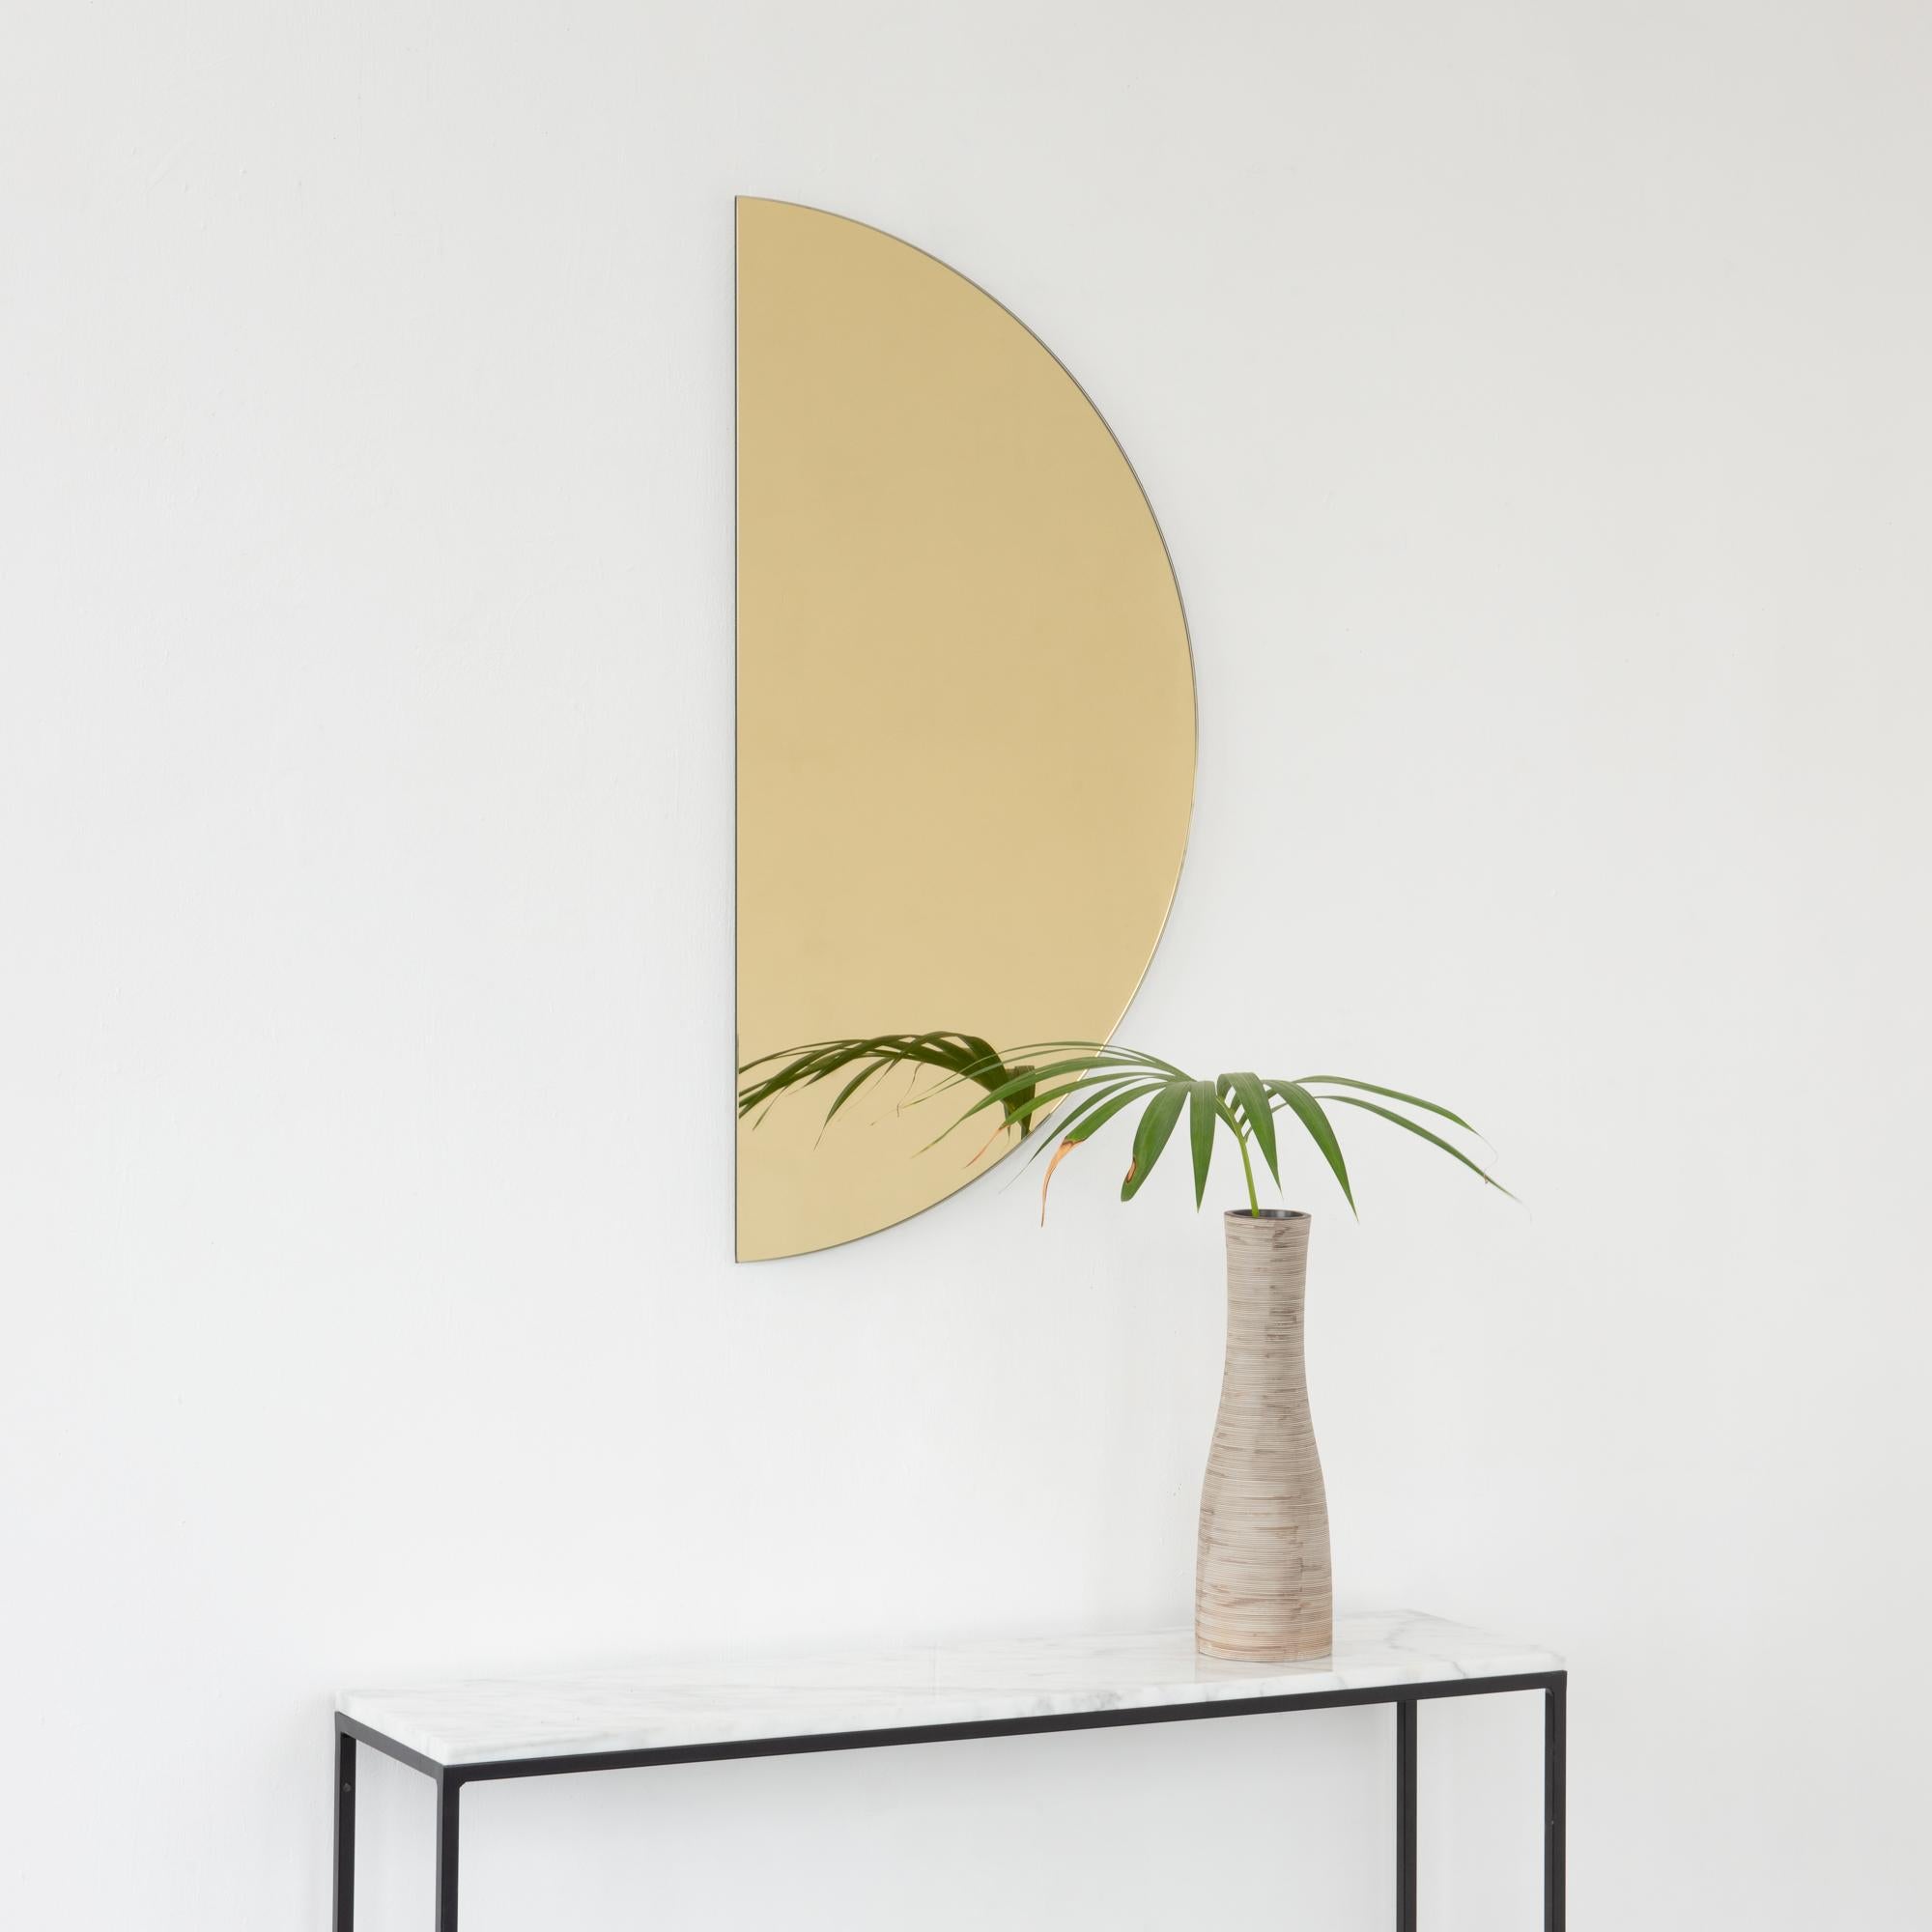 Minimalist half-moon Luna™ gold tinted frameless mirror with a floating effect. Fitted with a quality and ingenious hanging system for a flexible installation in 4 different directions. Designed and made in London, UK. 

The backing has a brand new